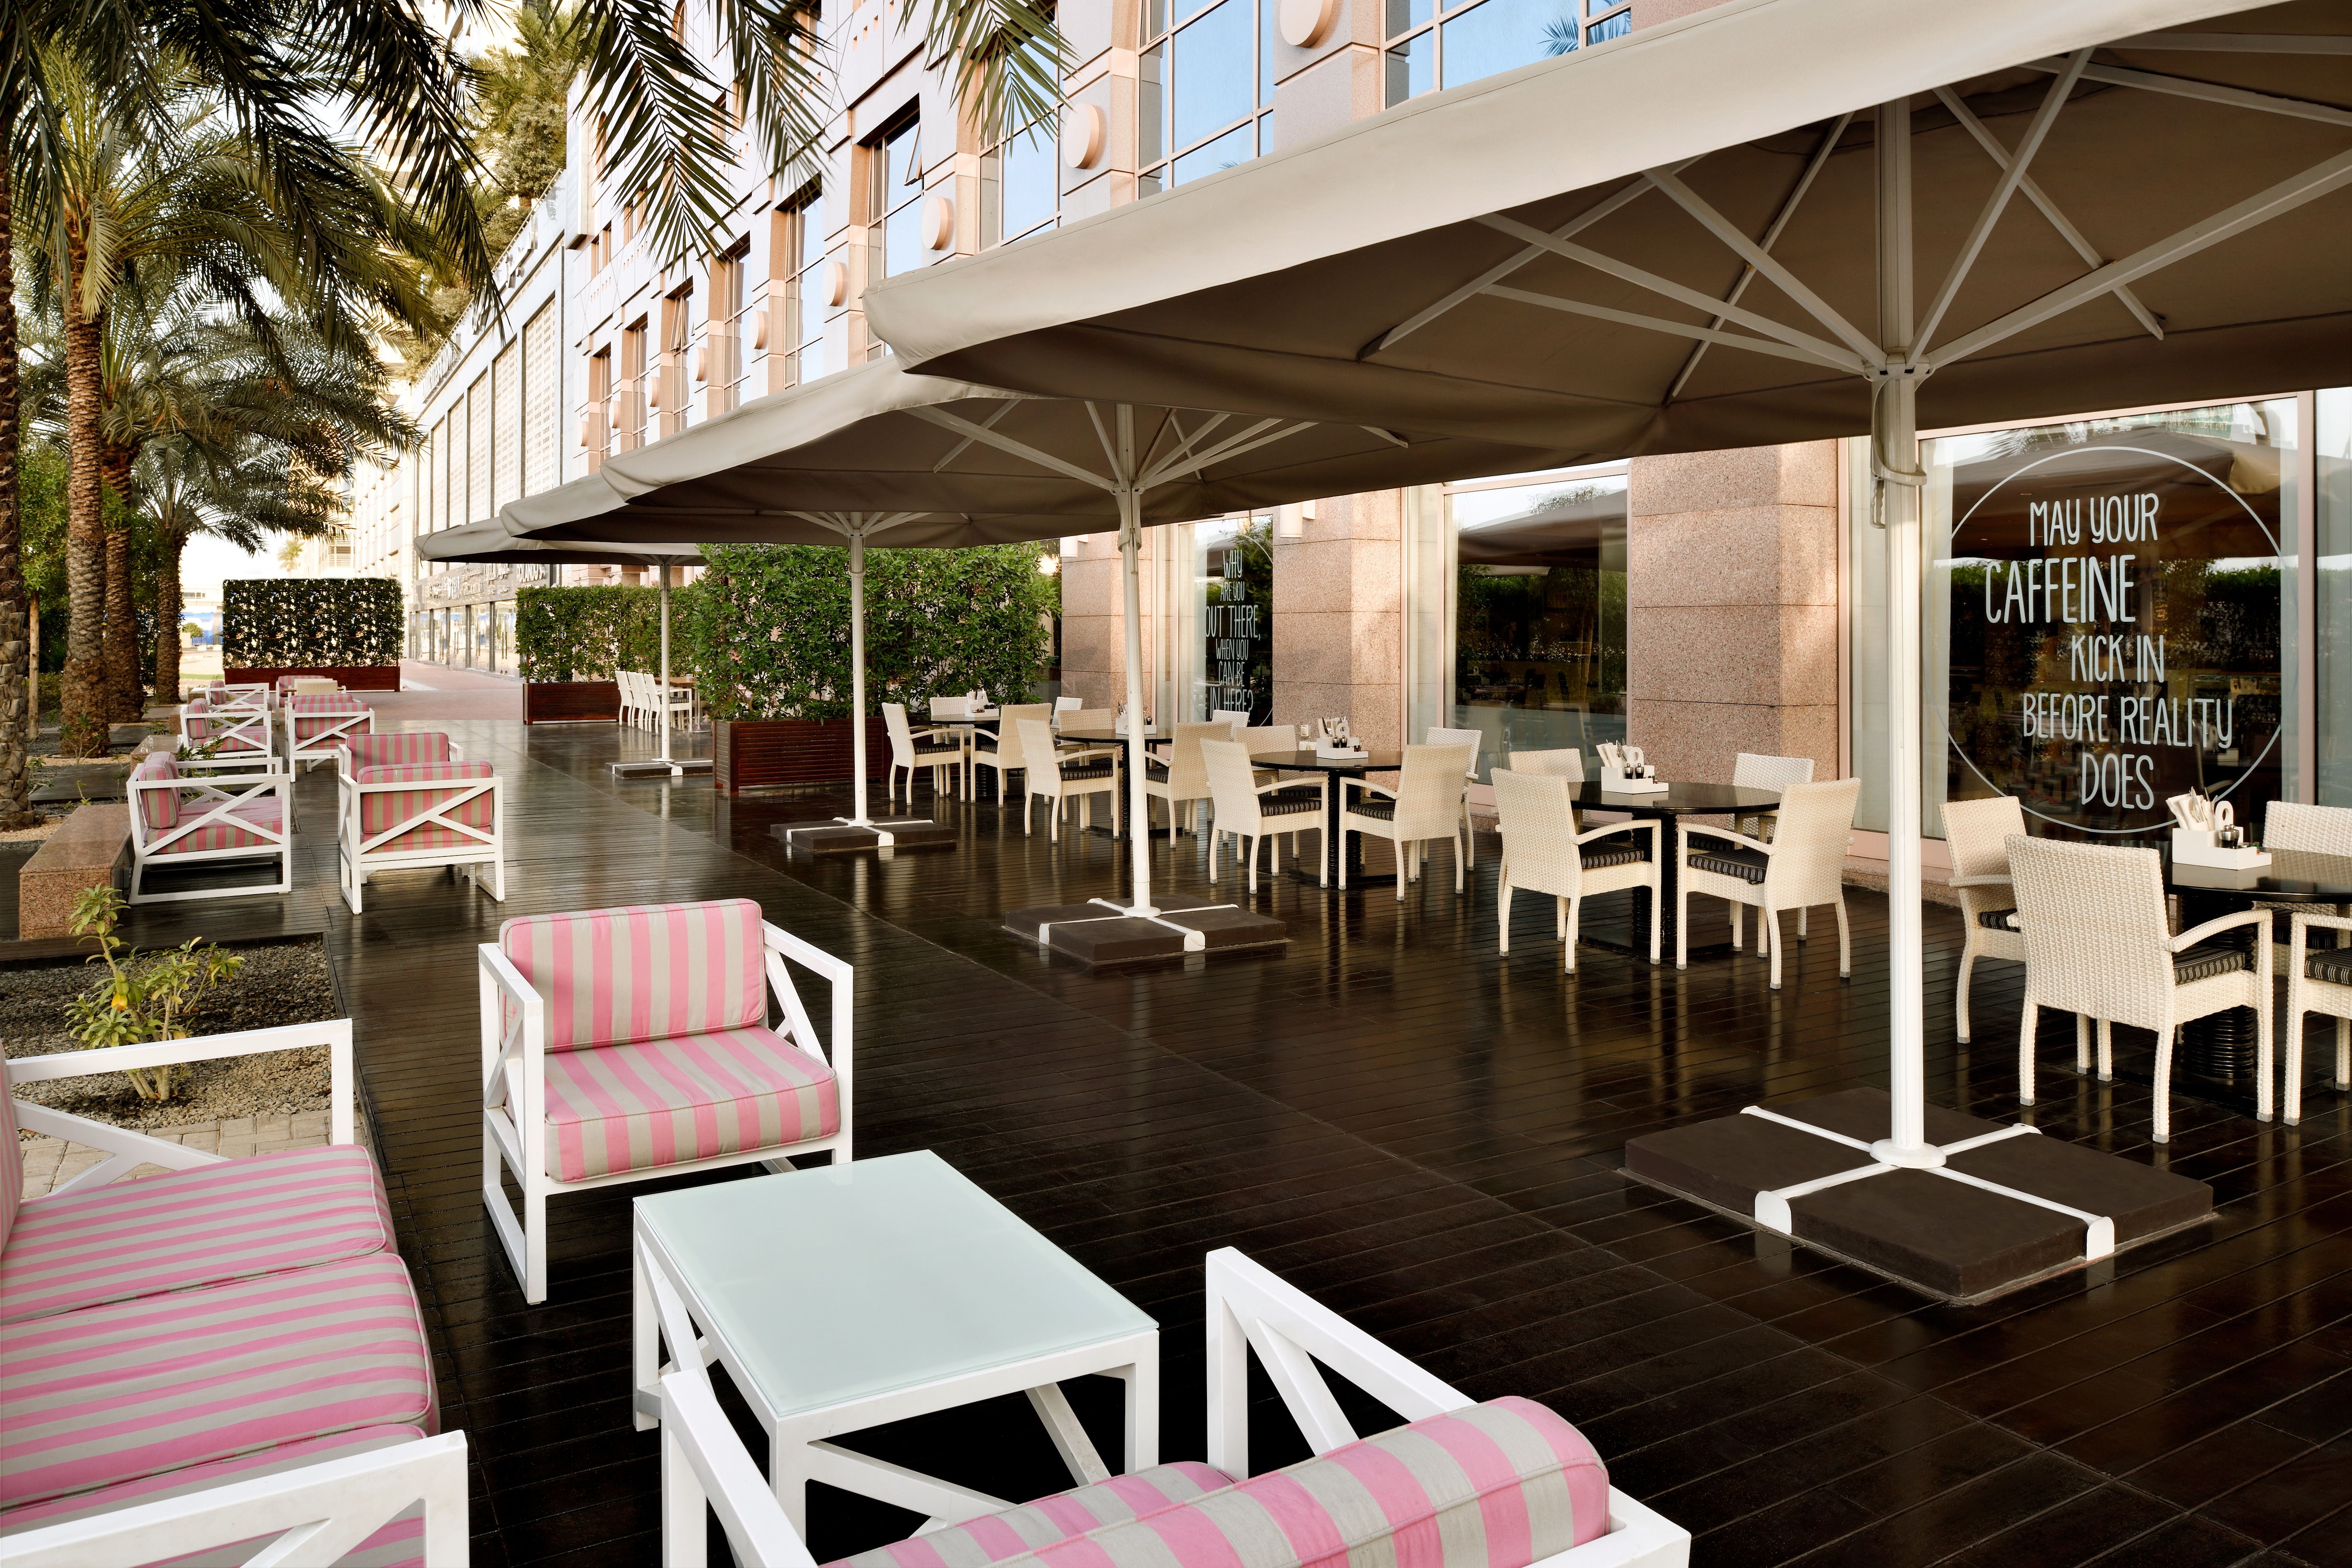 Pink striped chairs on dining terrace